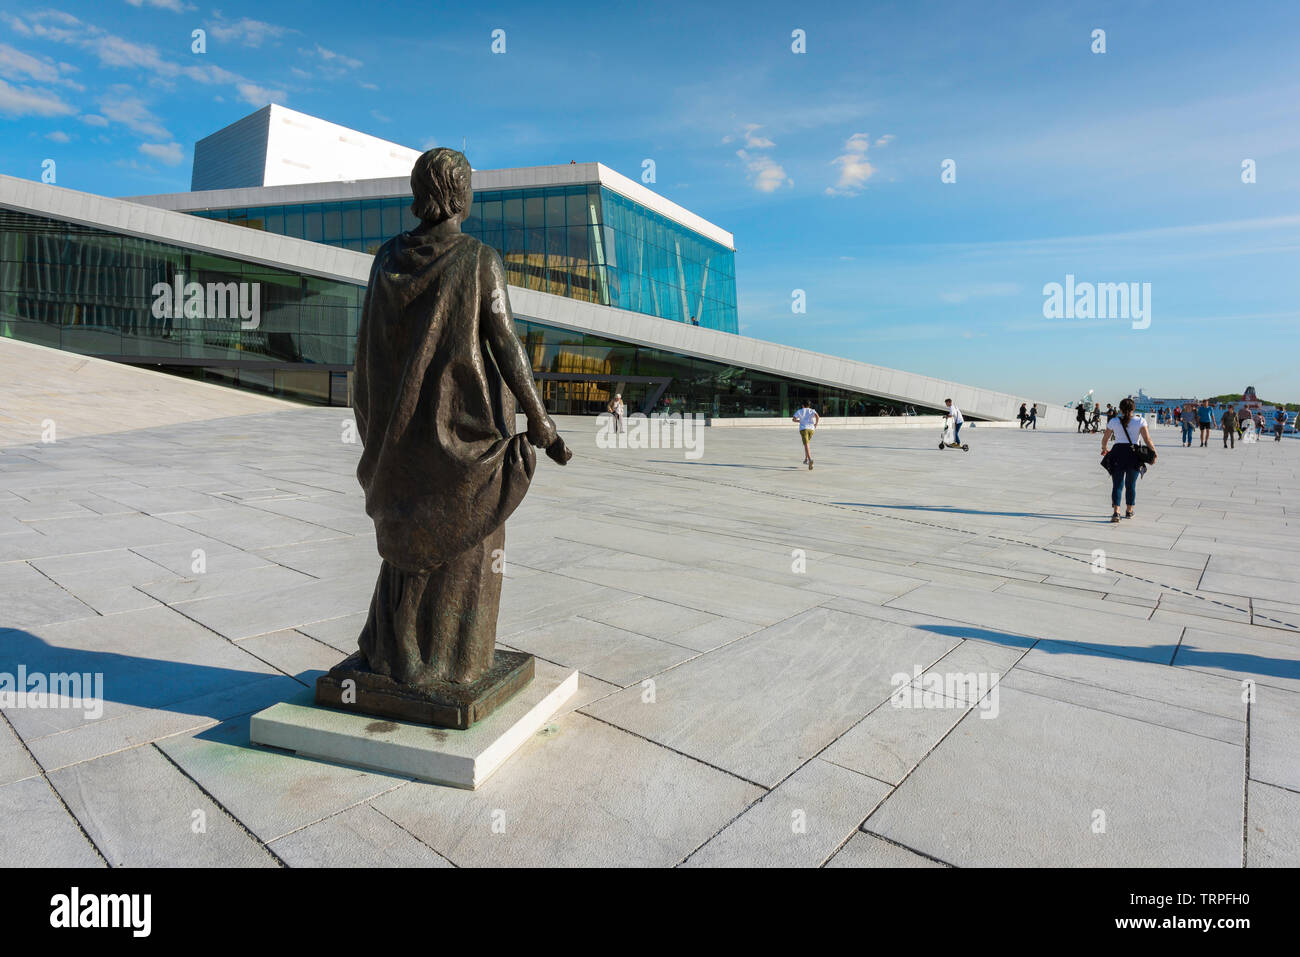 Opera House Oslo, rear view of the sculpture of opera singer Kirsten Flagstad sited on the waterfront concourse of the Oslo Opera House, Norway. Stock Photo